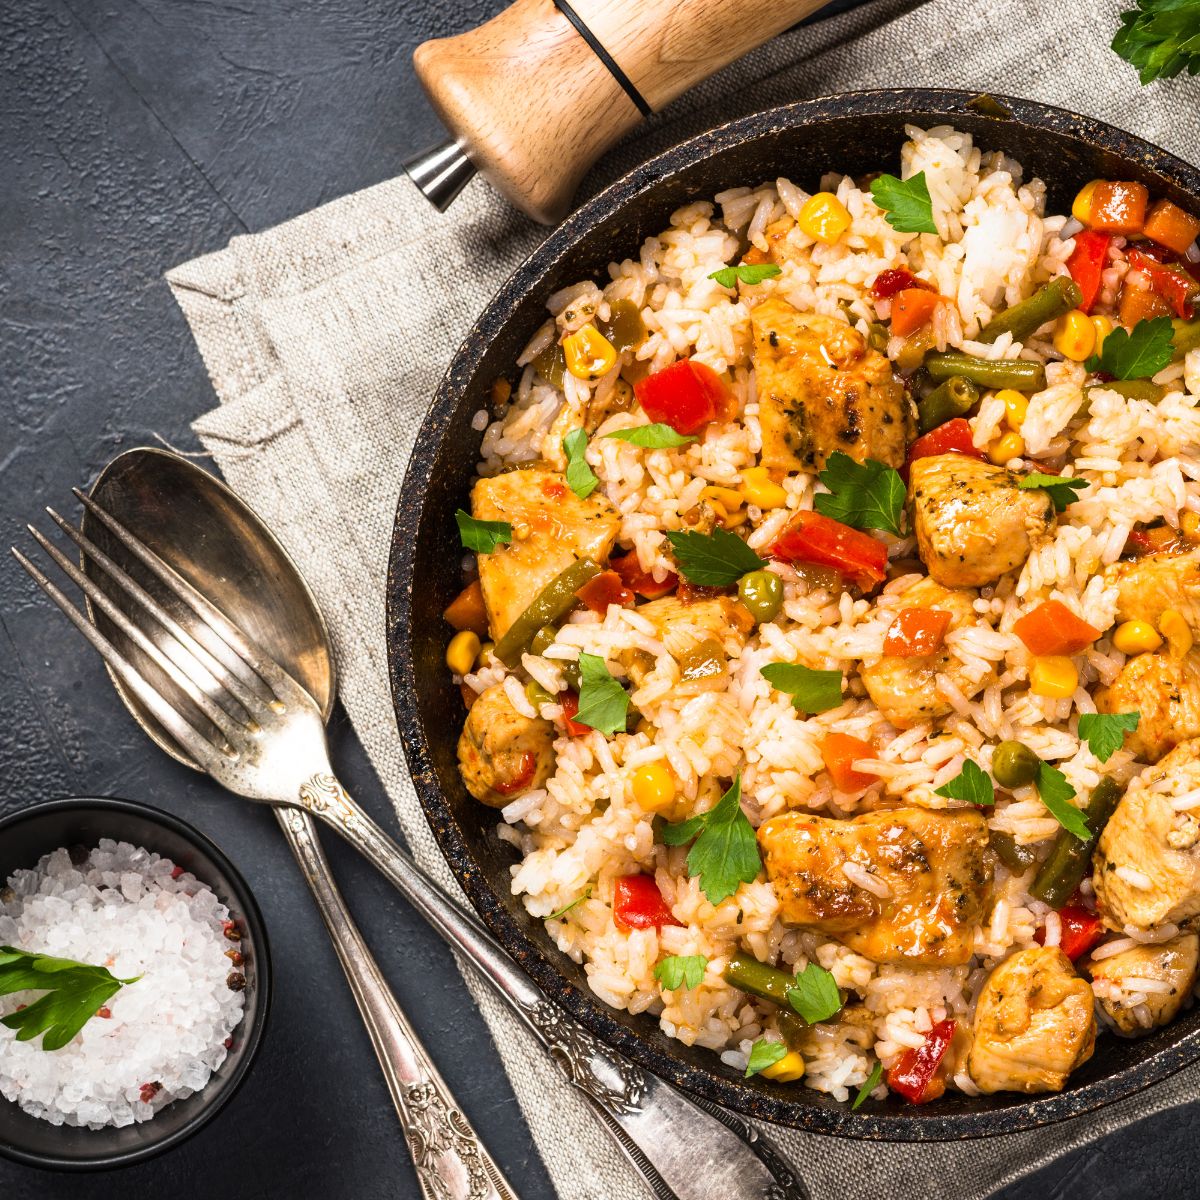 A pan of colorful fried rice with chicken chunks.